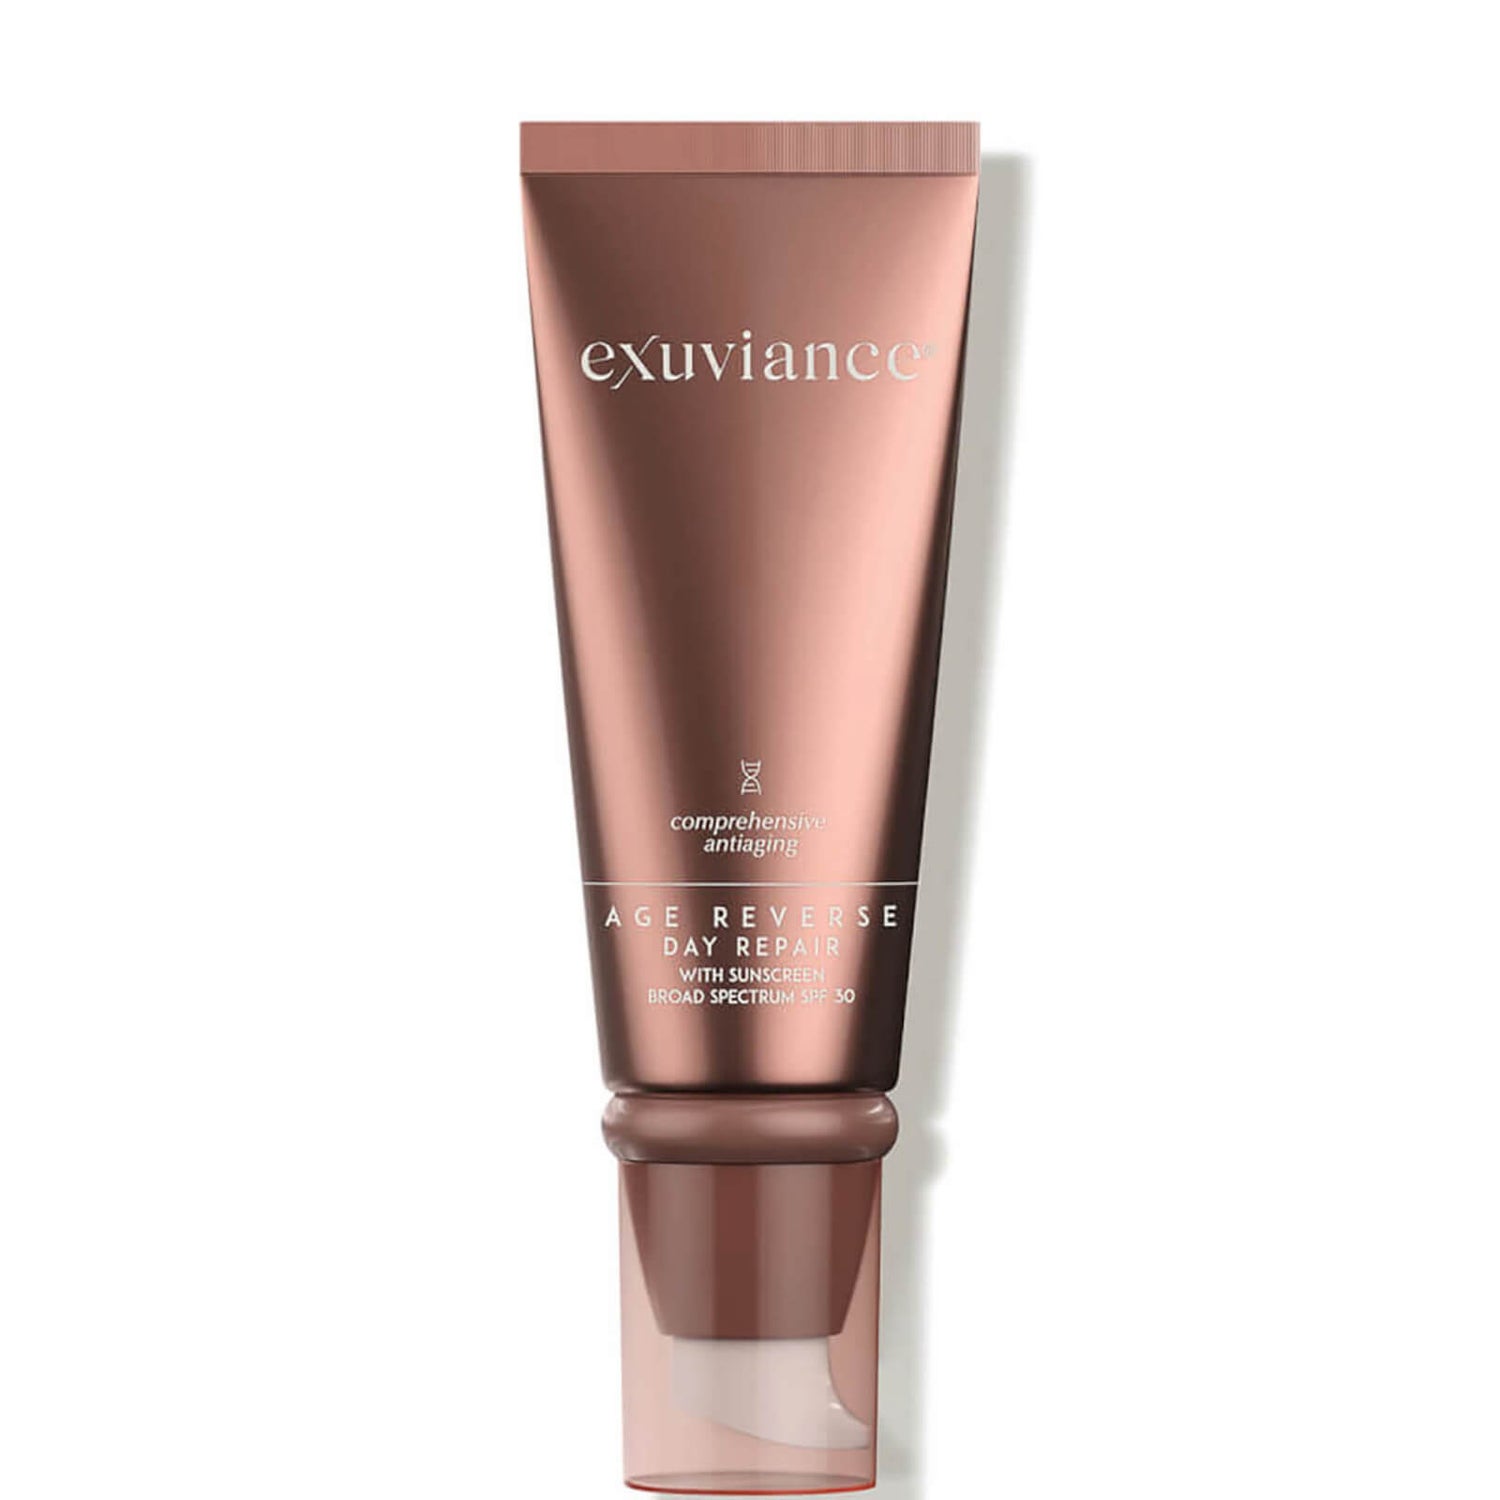 Exuviance AGE REVERSE Day Repair SPF 30 (1.75 oz.)